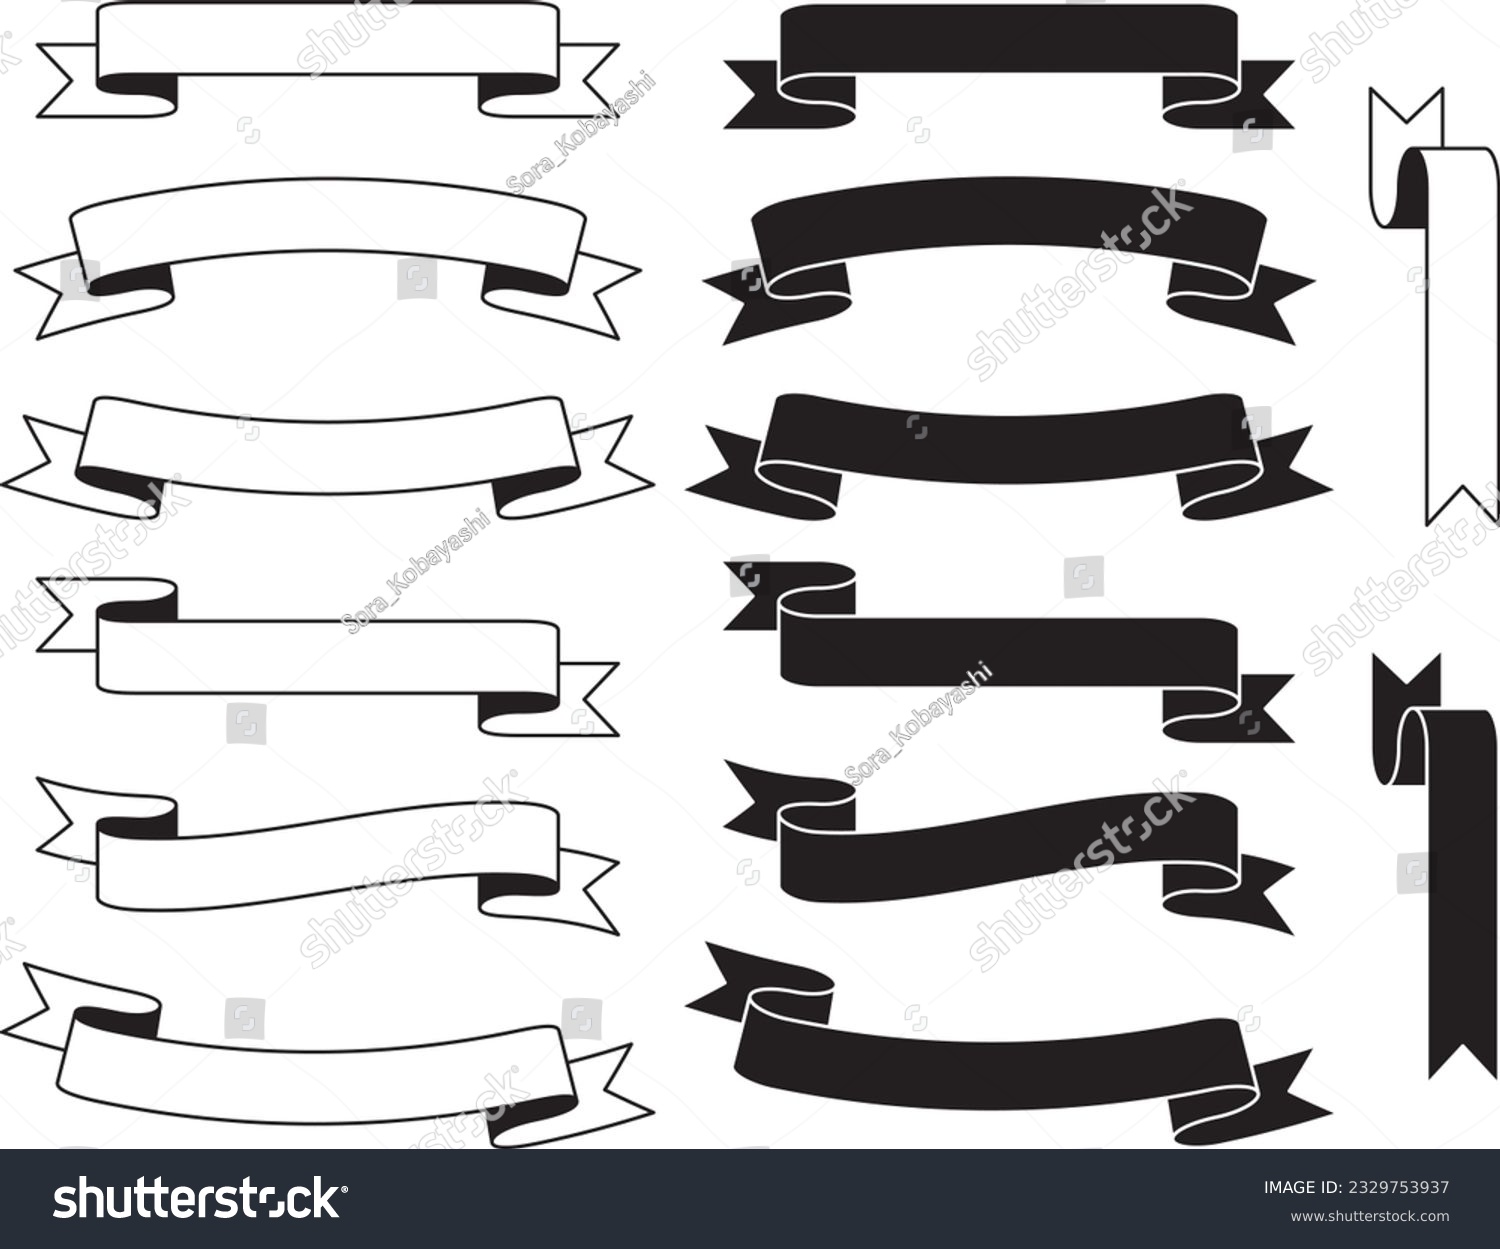 SVG of A set of simple monochrome title ribbons (black and white).
There are two types of ribbon, one with only one side pleats and the other with both side pleats. svg